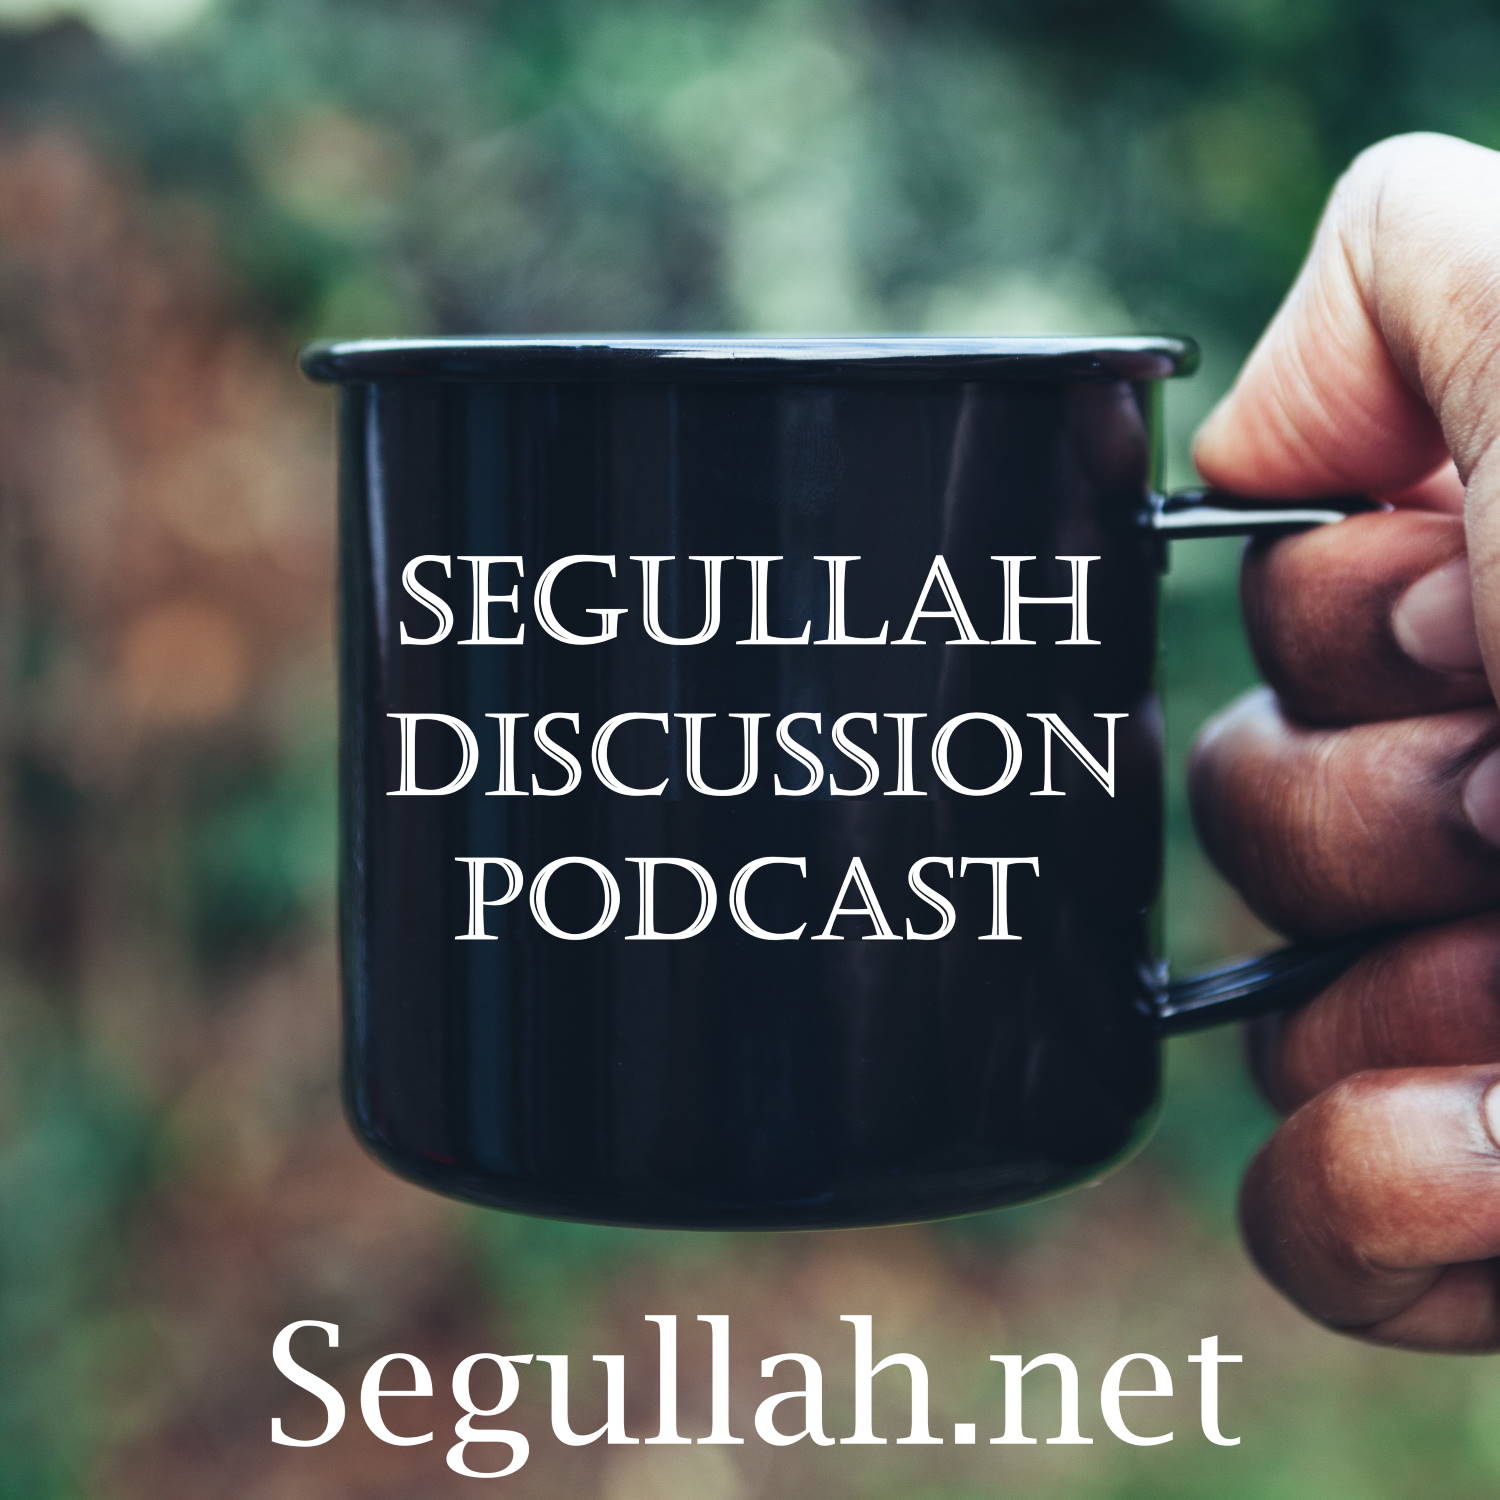 Segullah Discussion Podcast